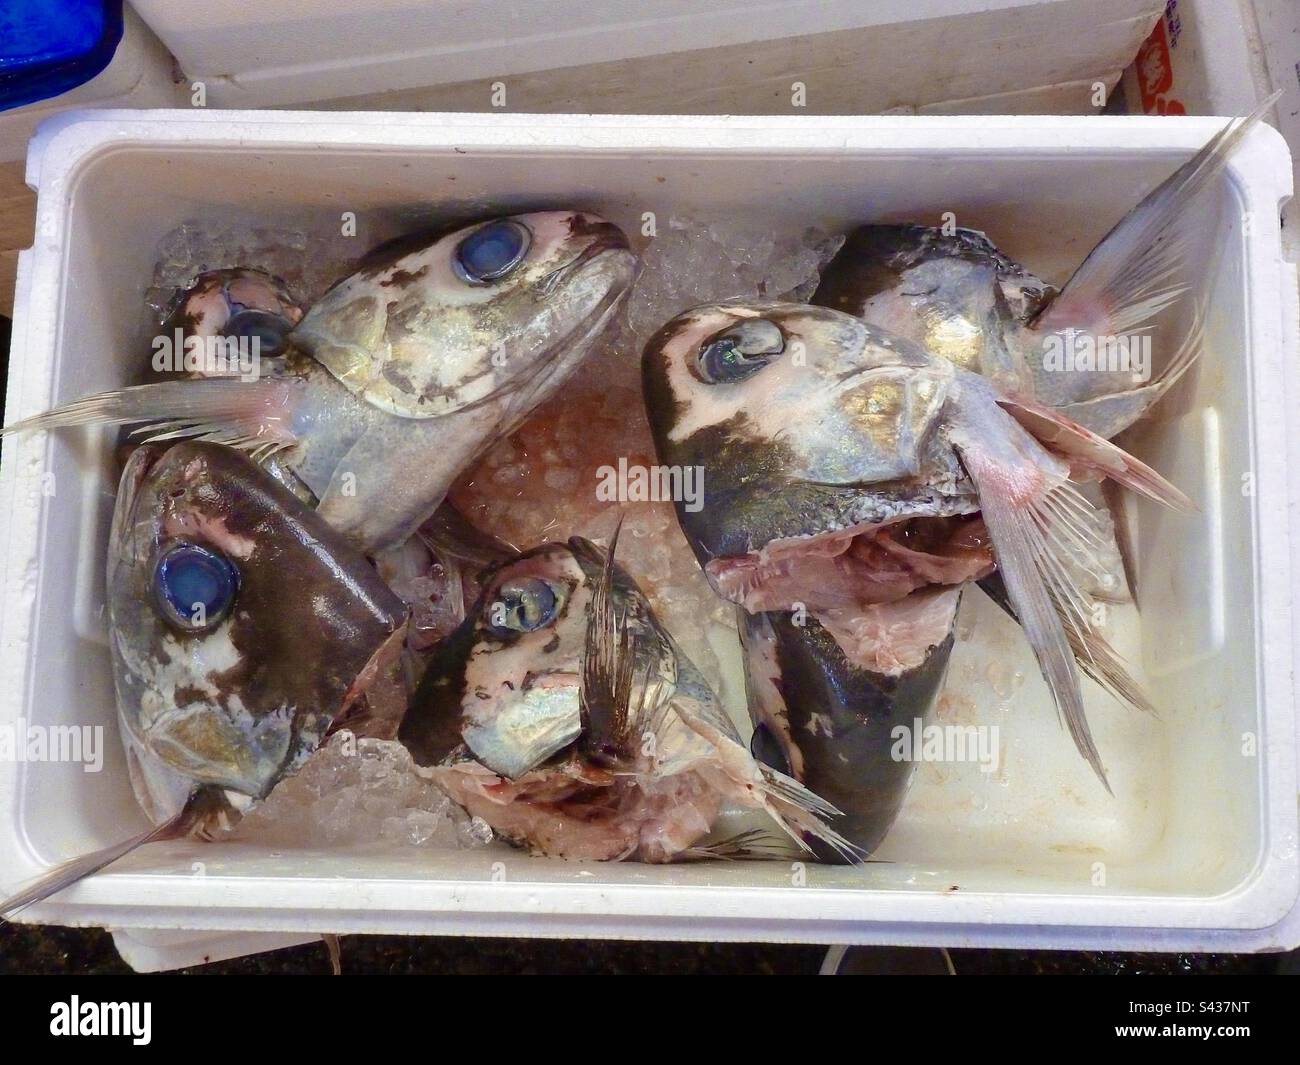 Polystyrene case of decapitated fish heads Stock Photo